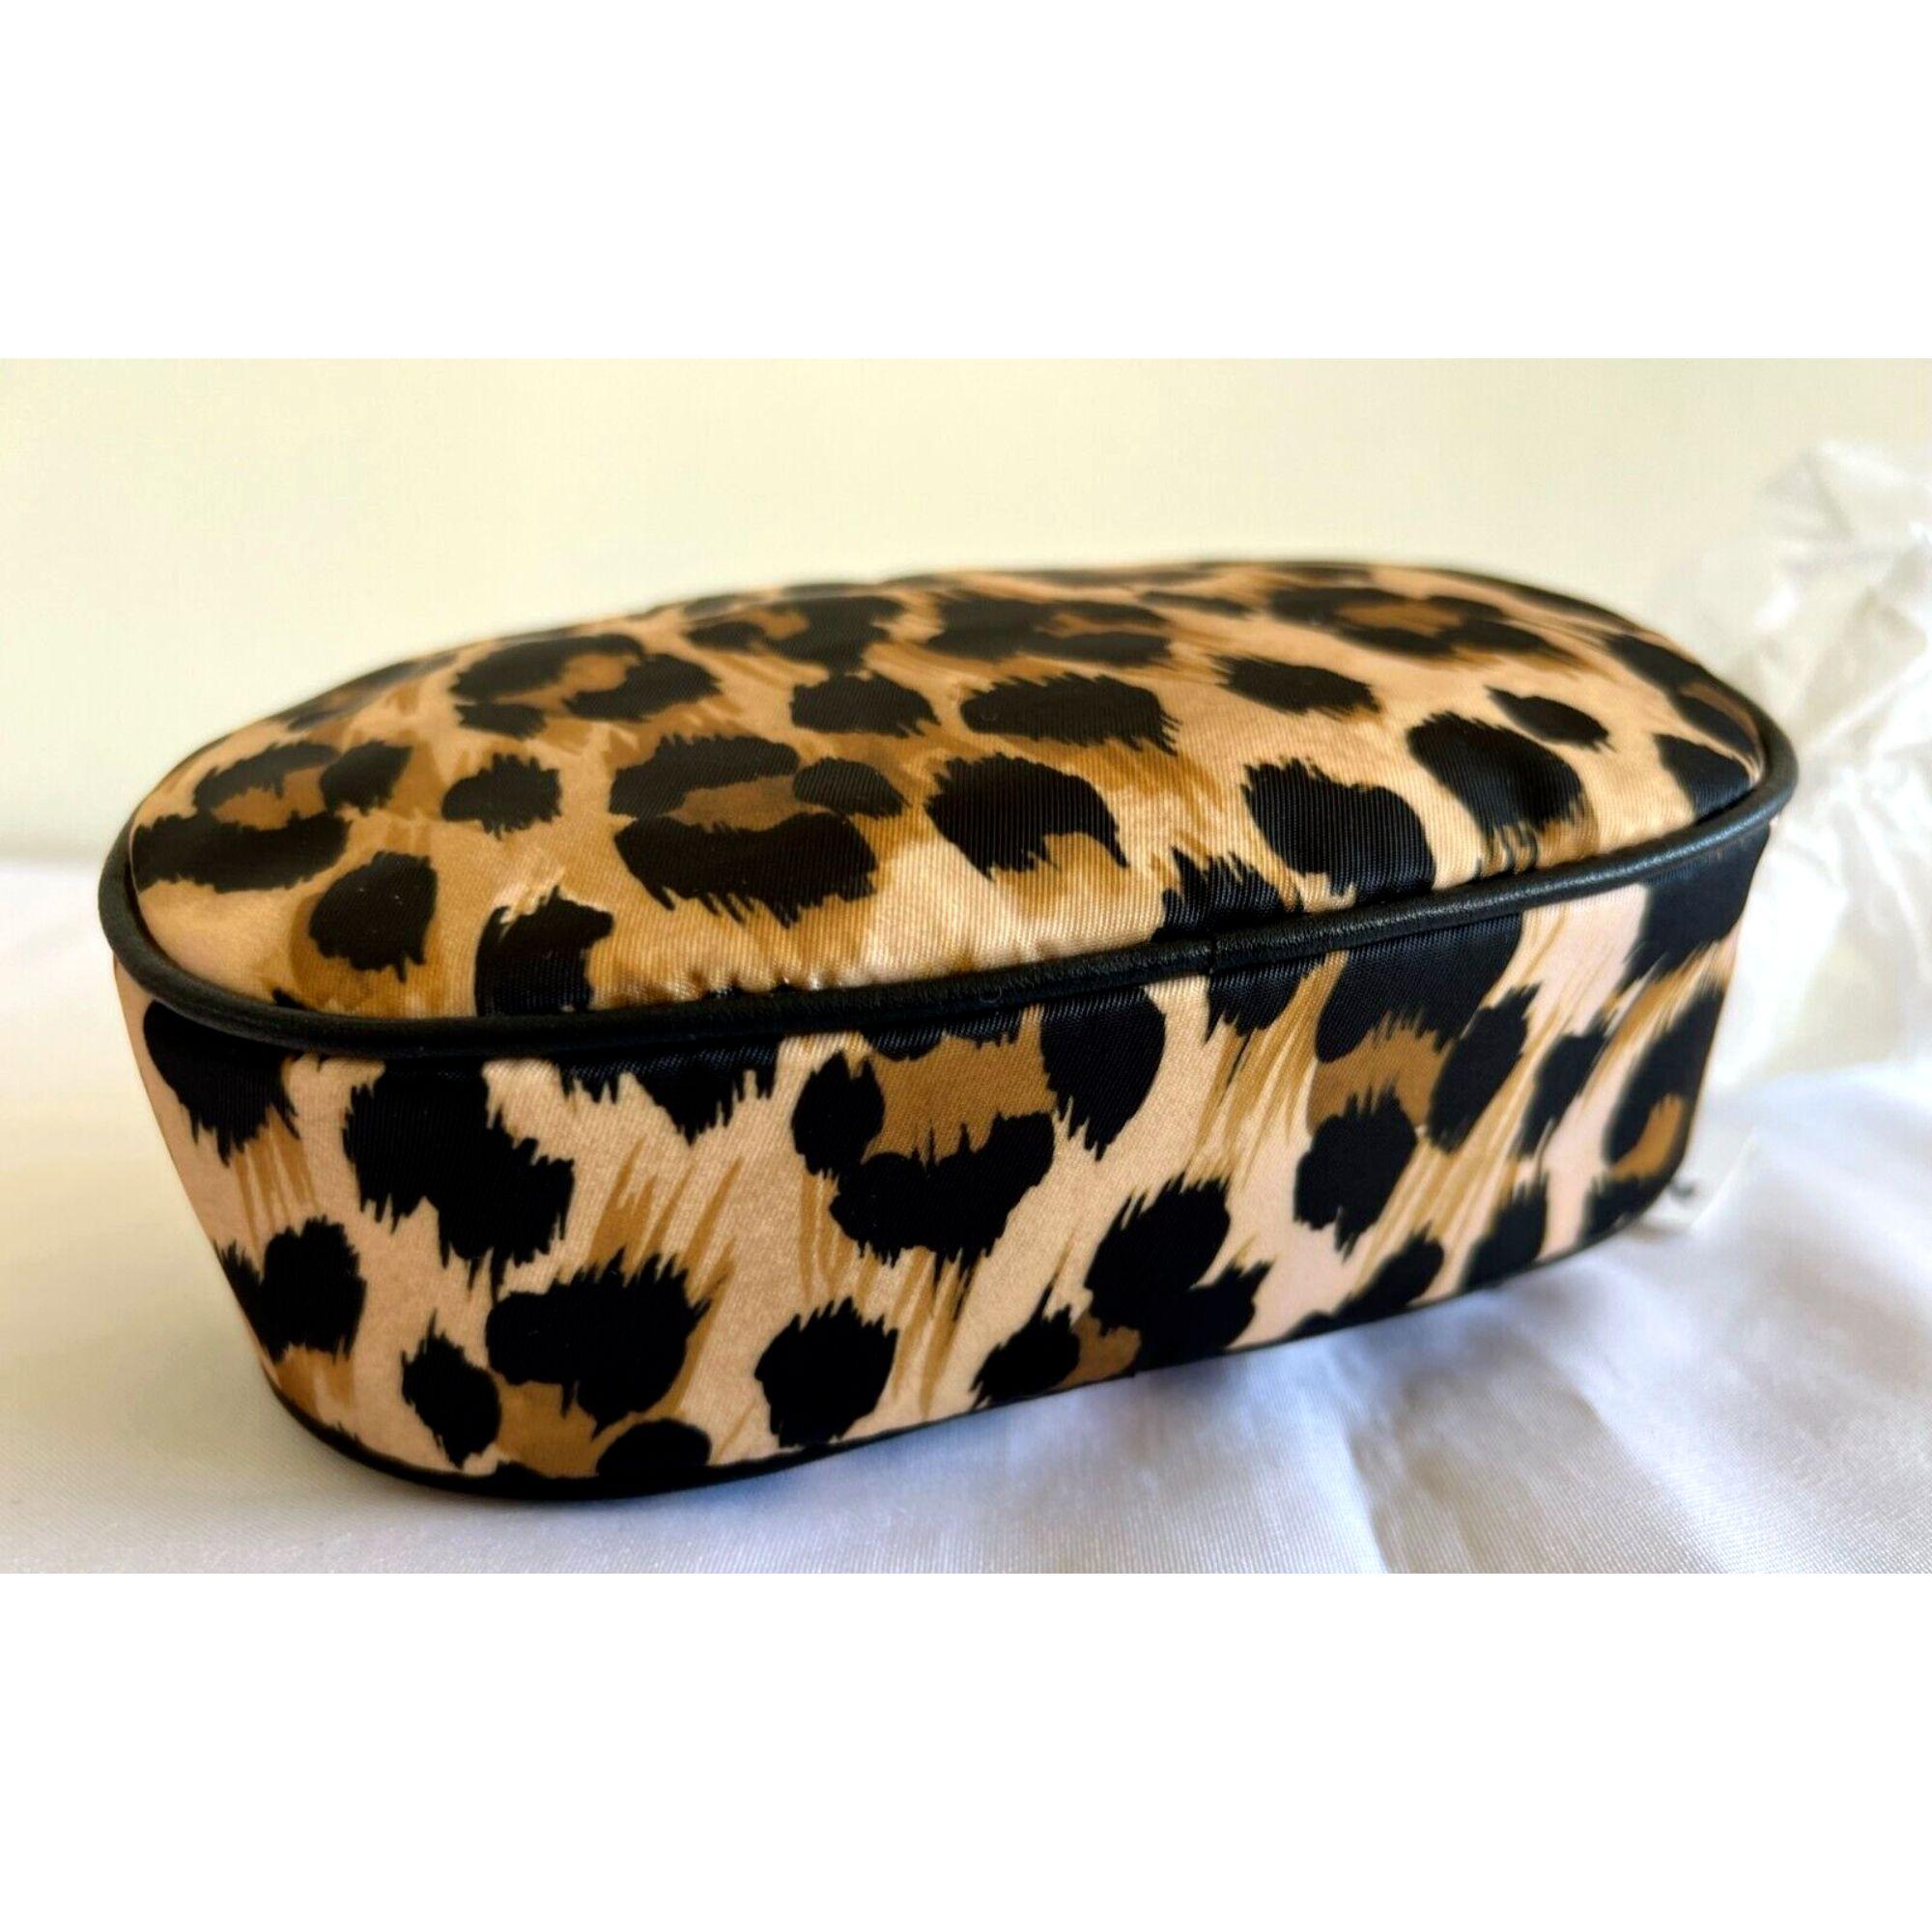 AW21 Moschino Couture Allover Leopard Print Shoulder Bag by Jeremy Scott For Sale 3